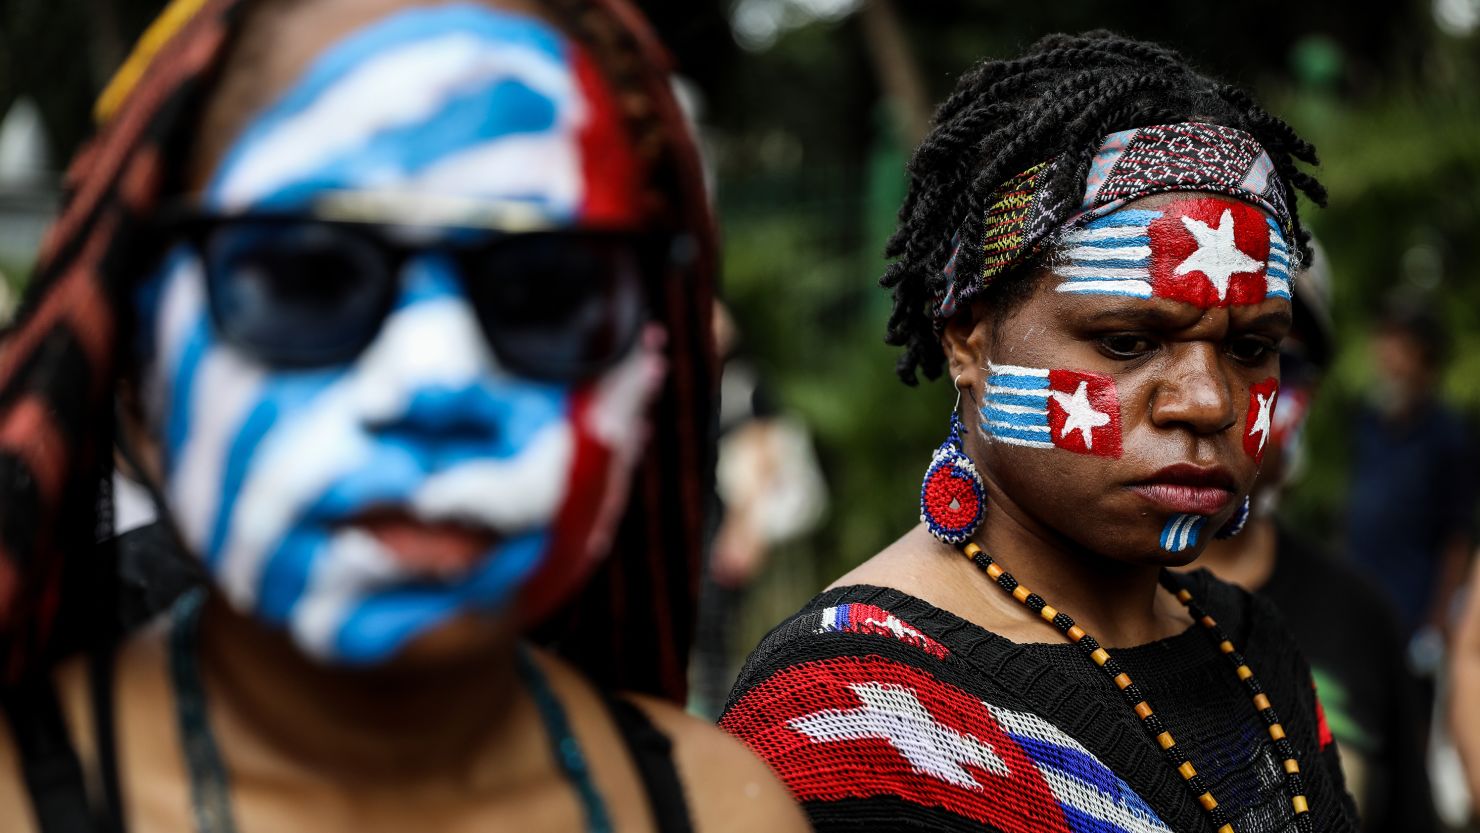 Papuans at a 2019 rally in Jakarta demanded that racial abuse in Indonesia had to stop.